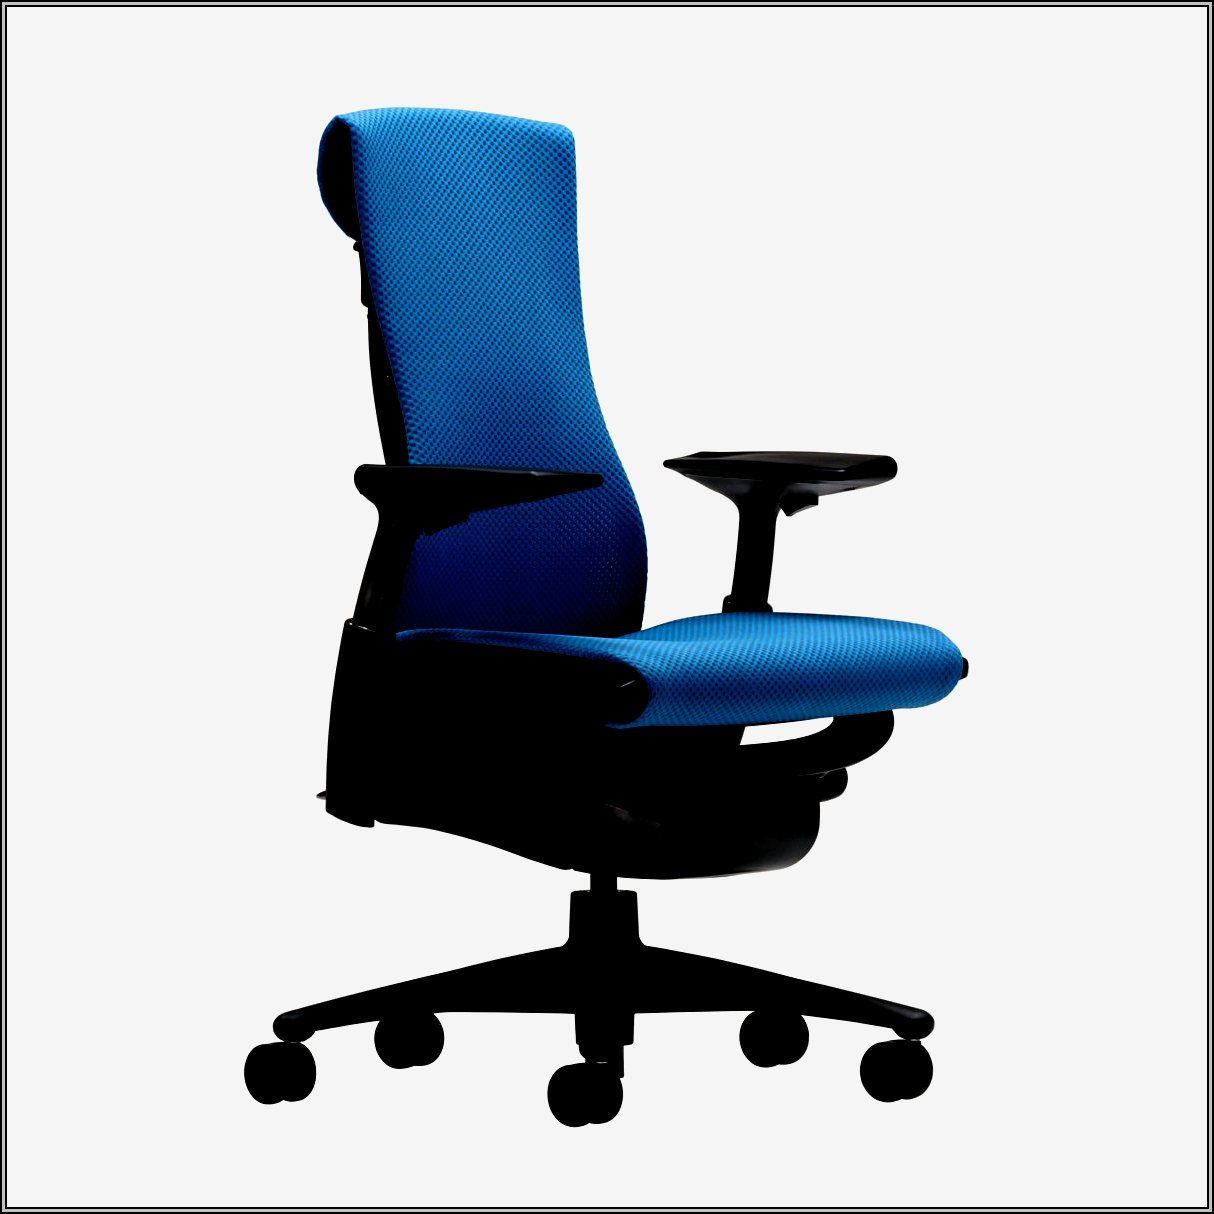 Herman Miller Chair Images